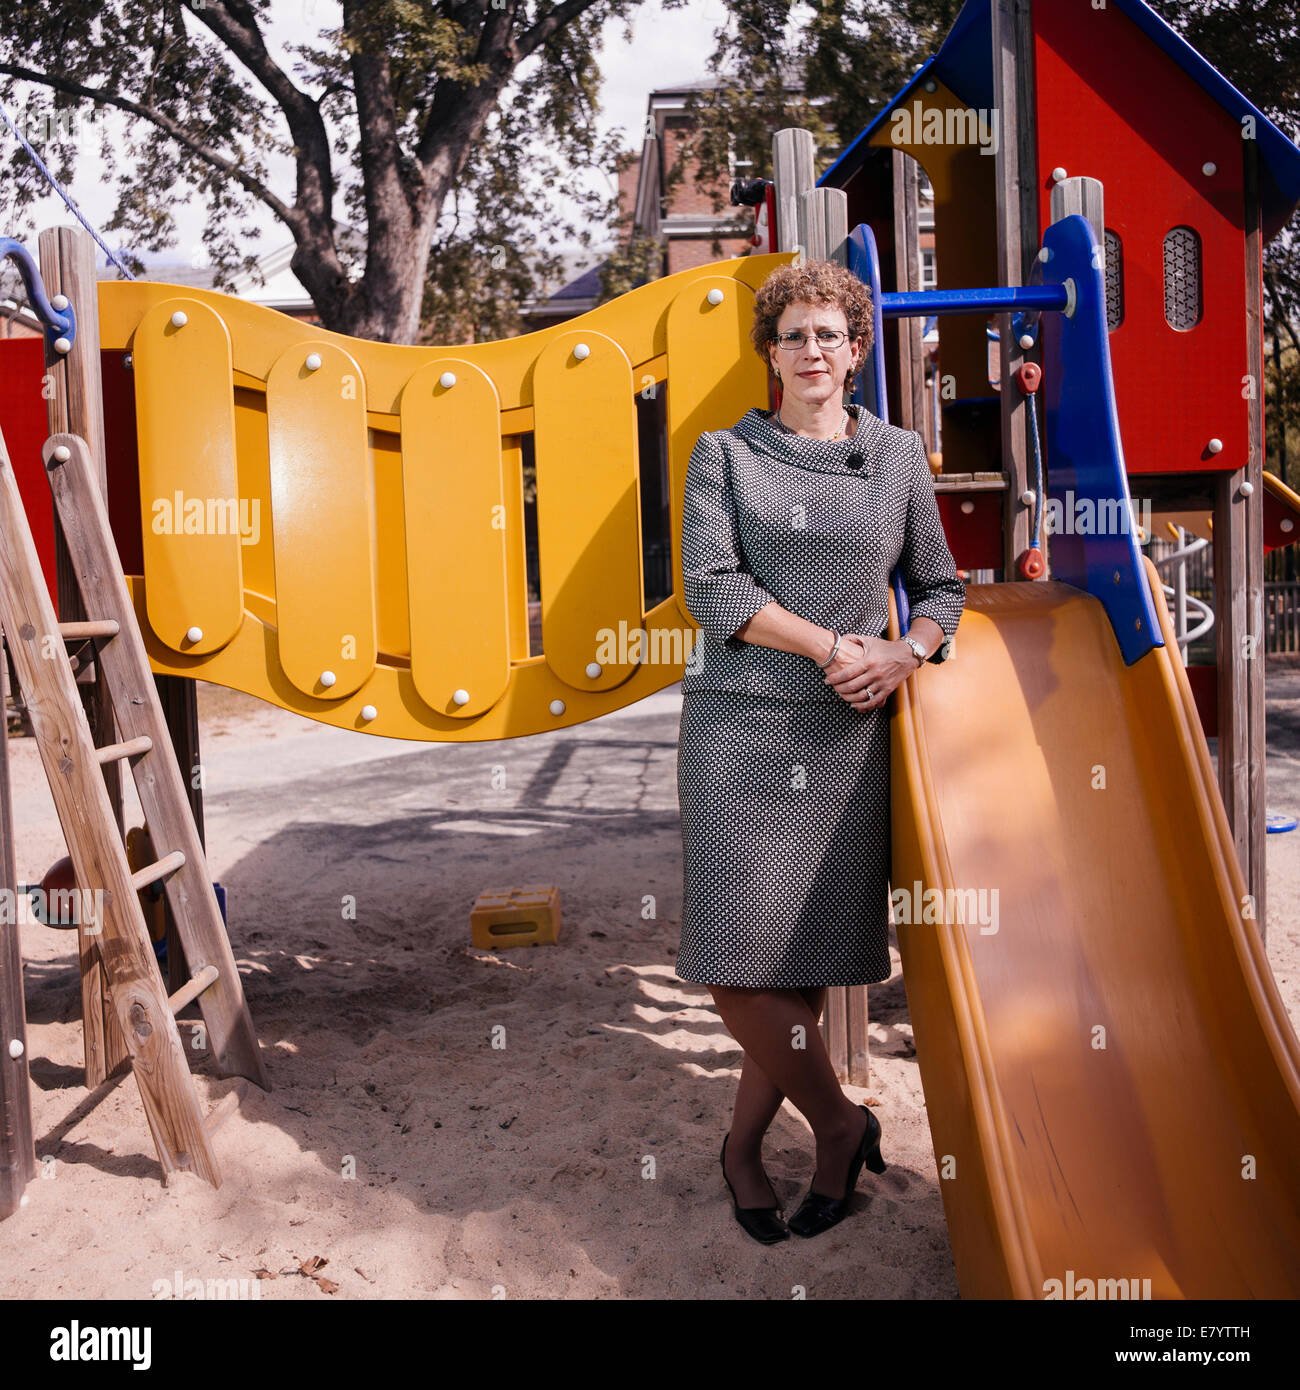 Middle-aged woman leaning on slide at playground Stock Photo